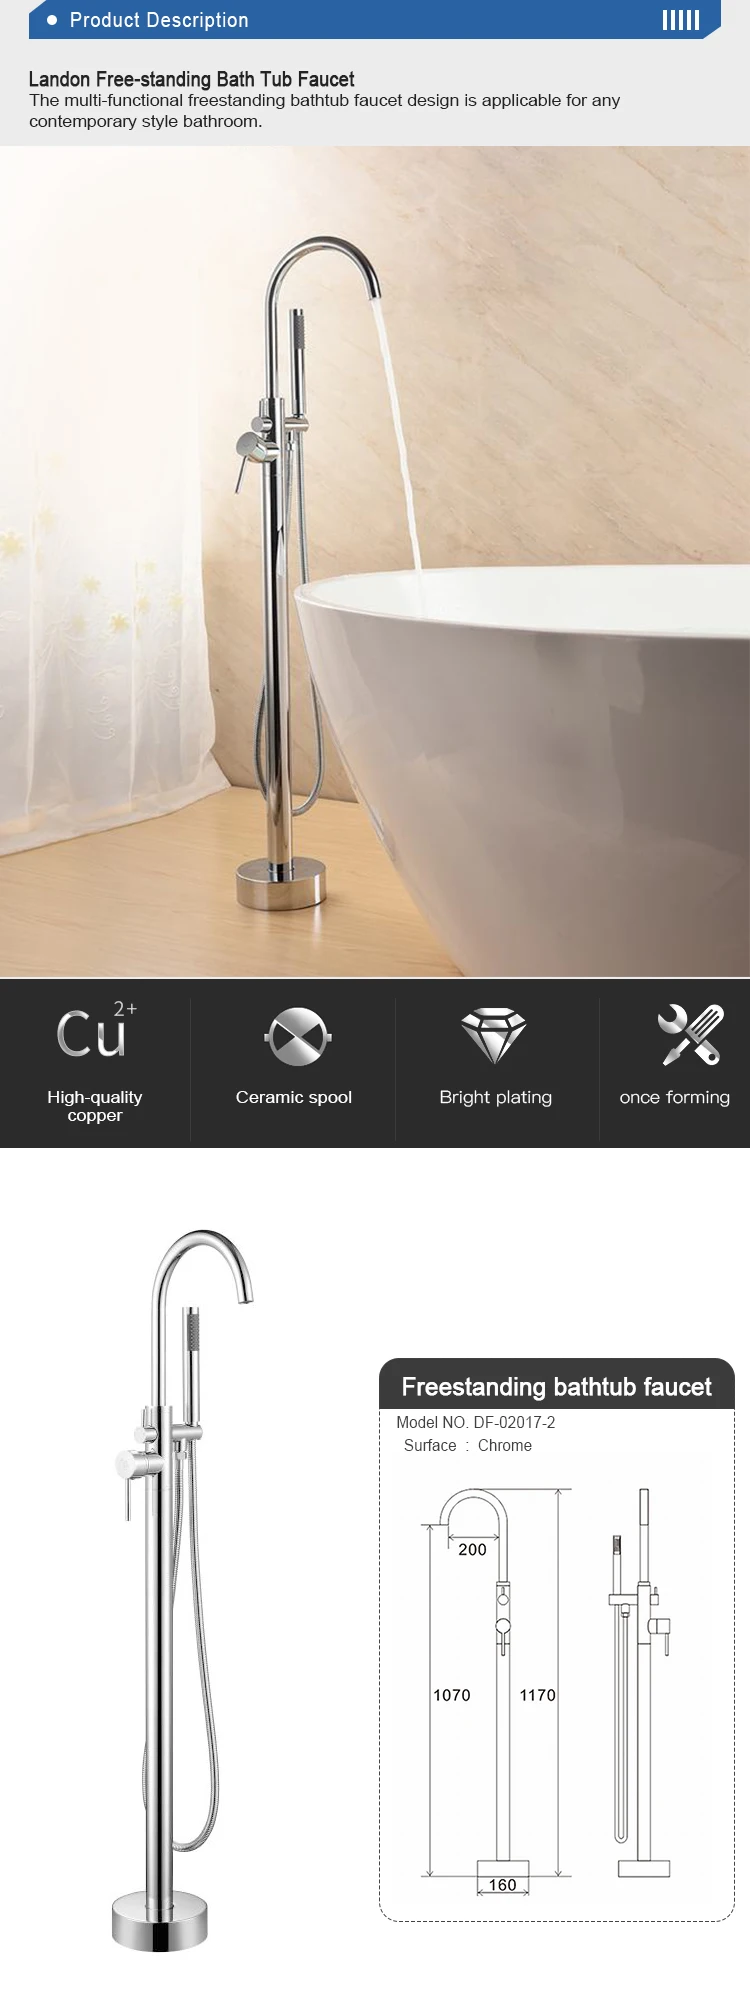 Standalone Faucet Tubs Stand Mixer By Factory Bathtub Faucets Brand Useful Selling Bath Tub Cover Lavatory Russian Shower